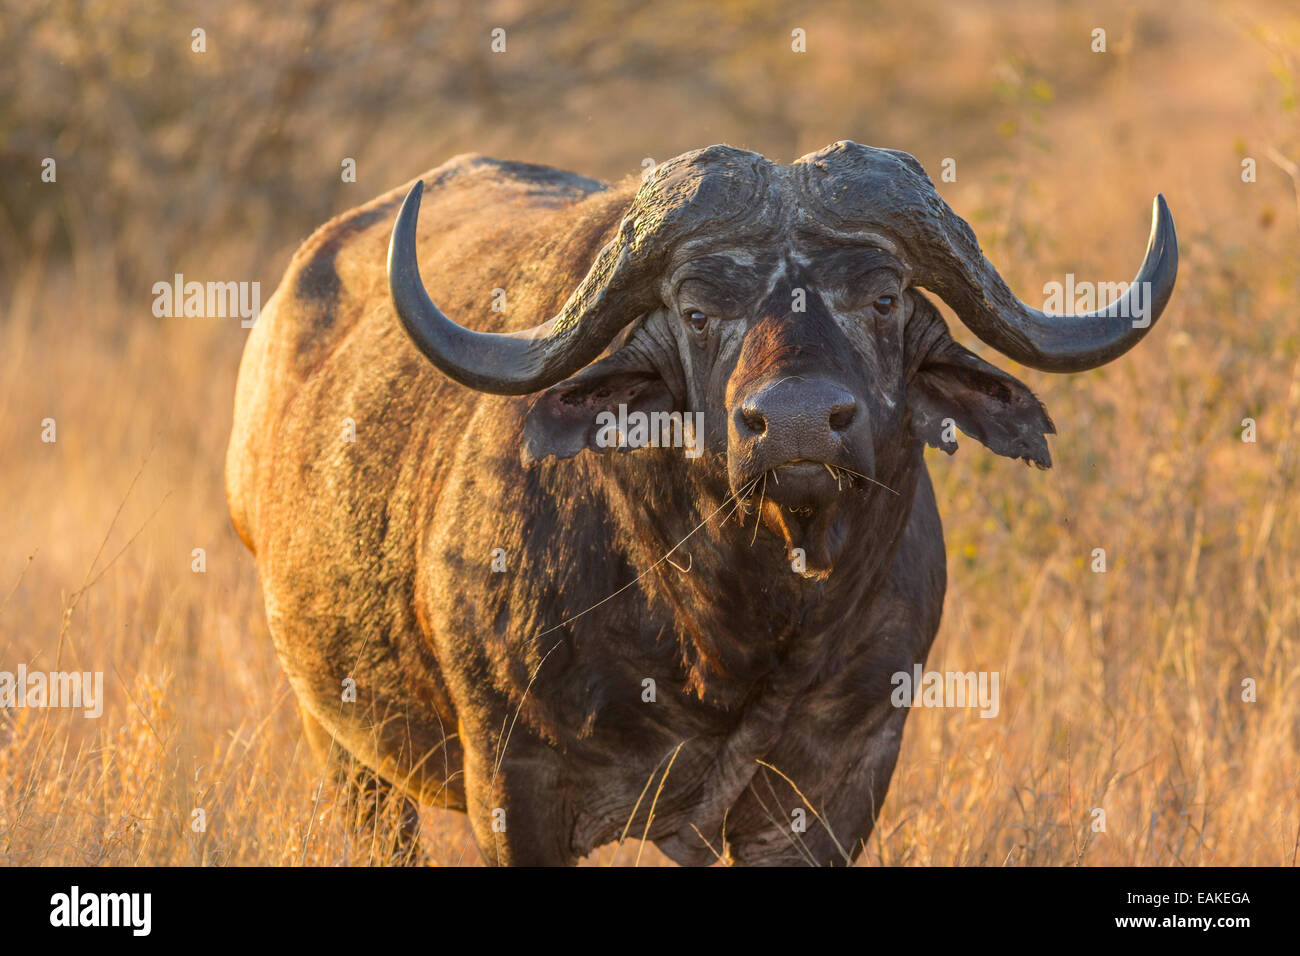 KRUGER NATIONAL PARK, SOUTH AFRICA - African Buffalo also known as Cape Buffalo Syncerus caffer caffer. Stock Photo